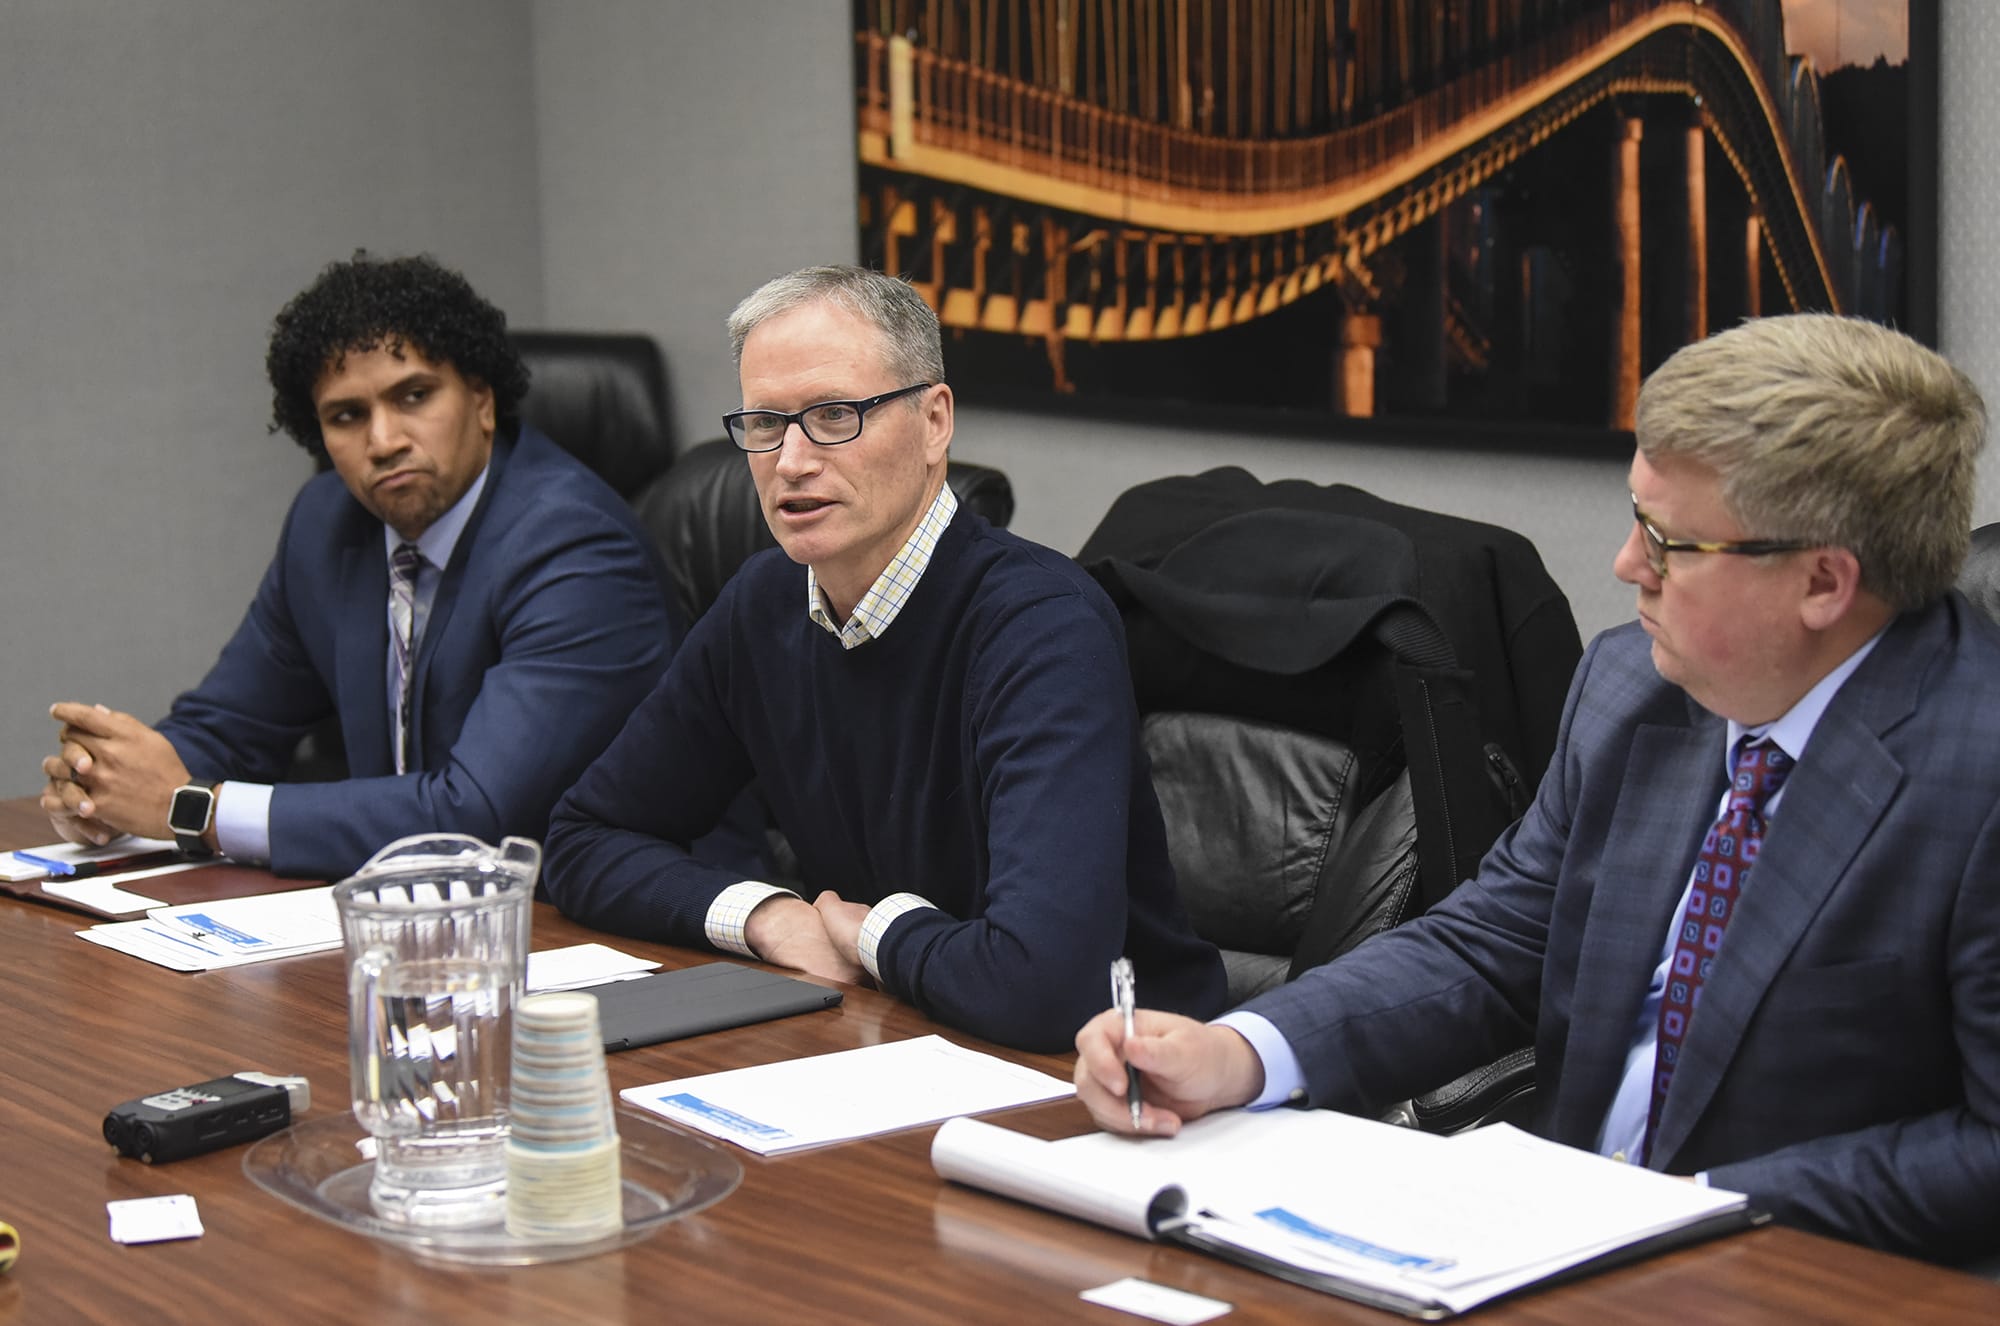 Oregon Department of Transportation Commissioner Alando Simpson, from left, Commissioner Sean O'Hollaren and Region 1 Manager Rian Windsheimer discuss the state's plan for tolling Interstate 5 and Interstate 205 with The Columbian Editorial Board on Wednesday.